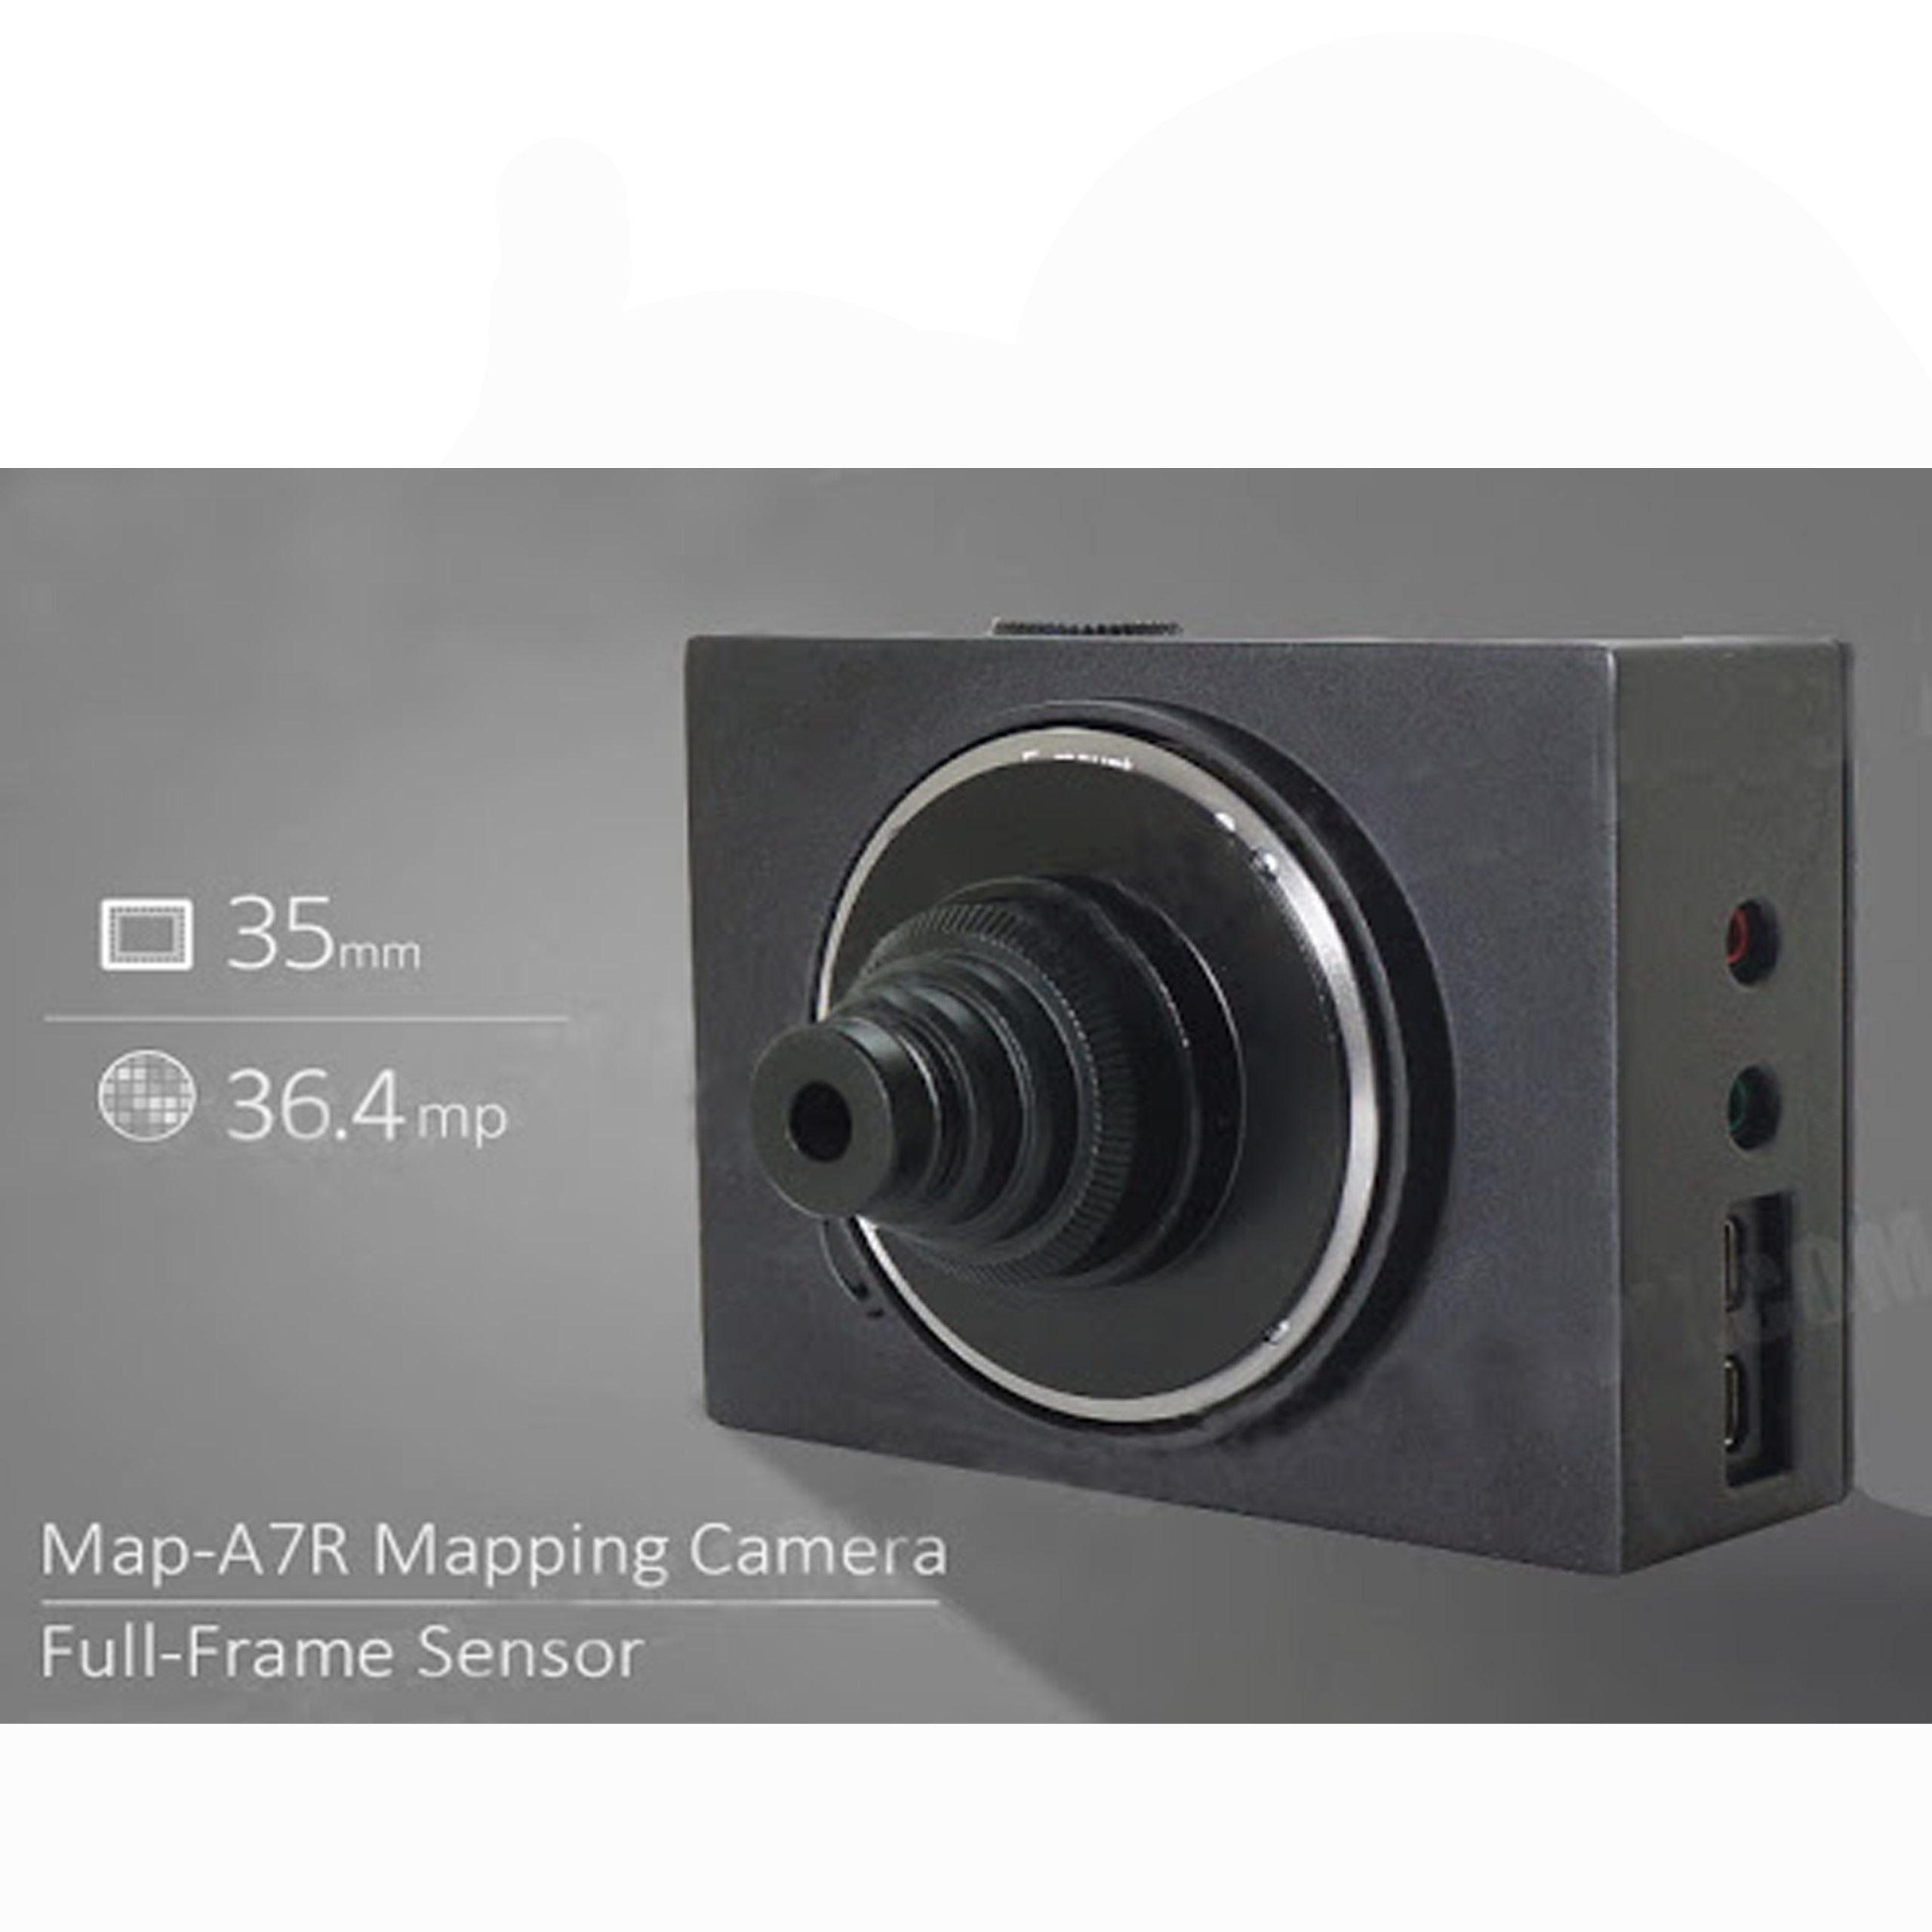 A7R mapping camera